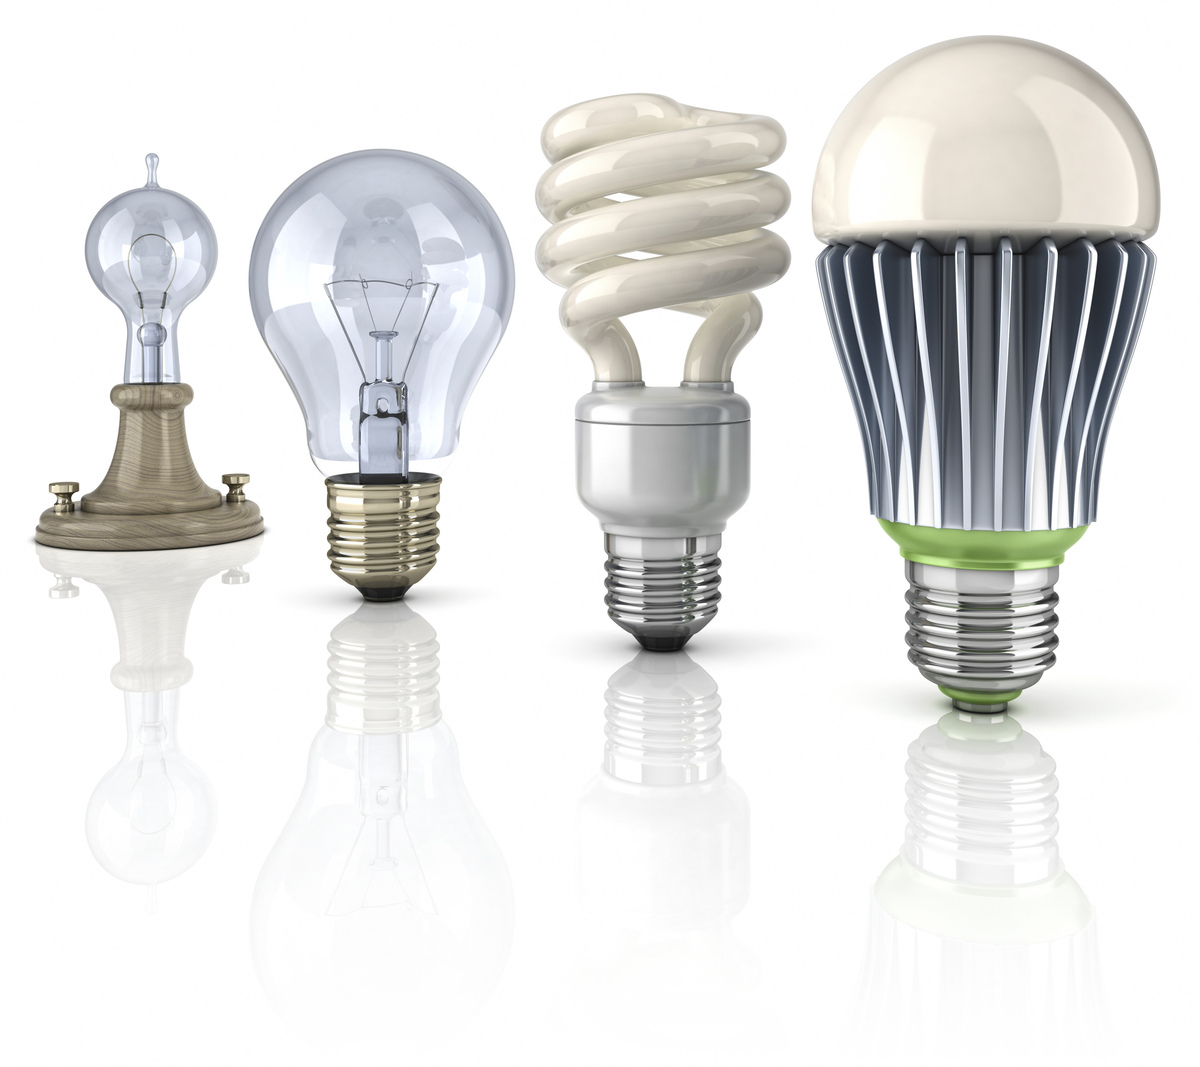 What Does An LED Bulb Look Like